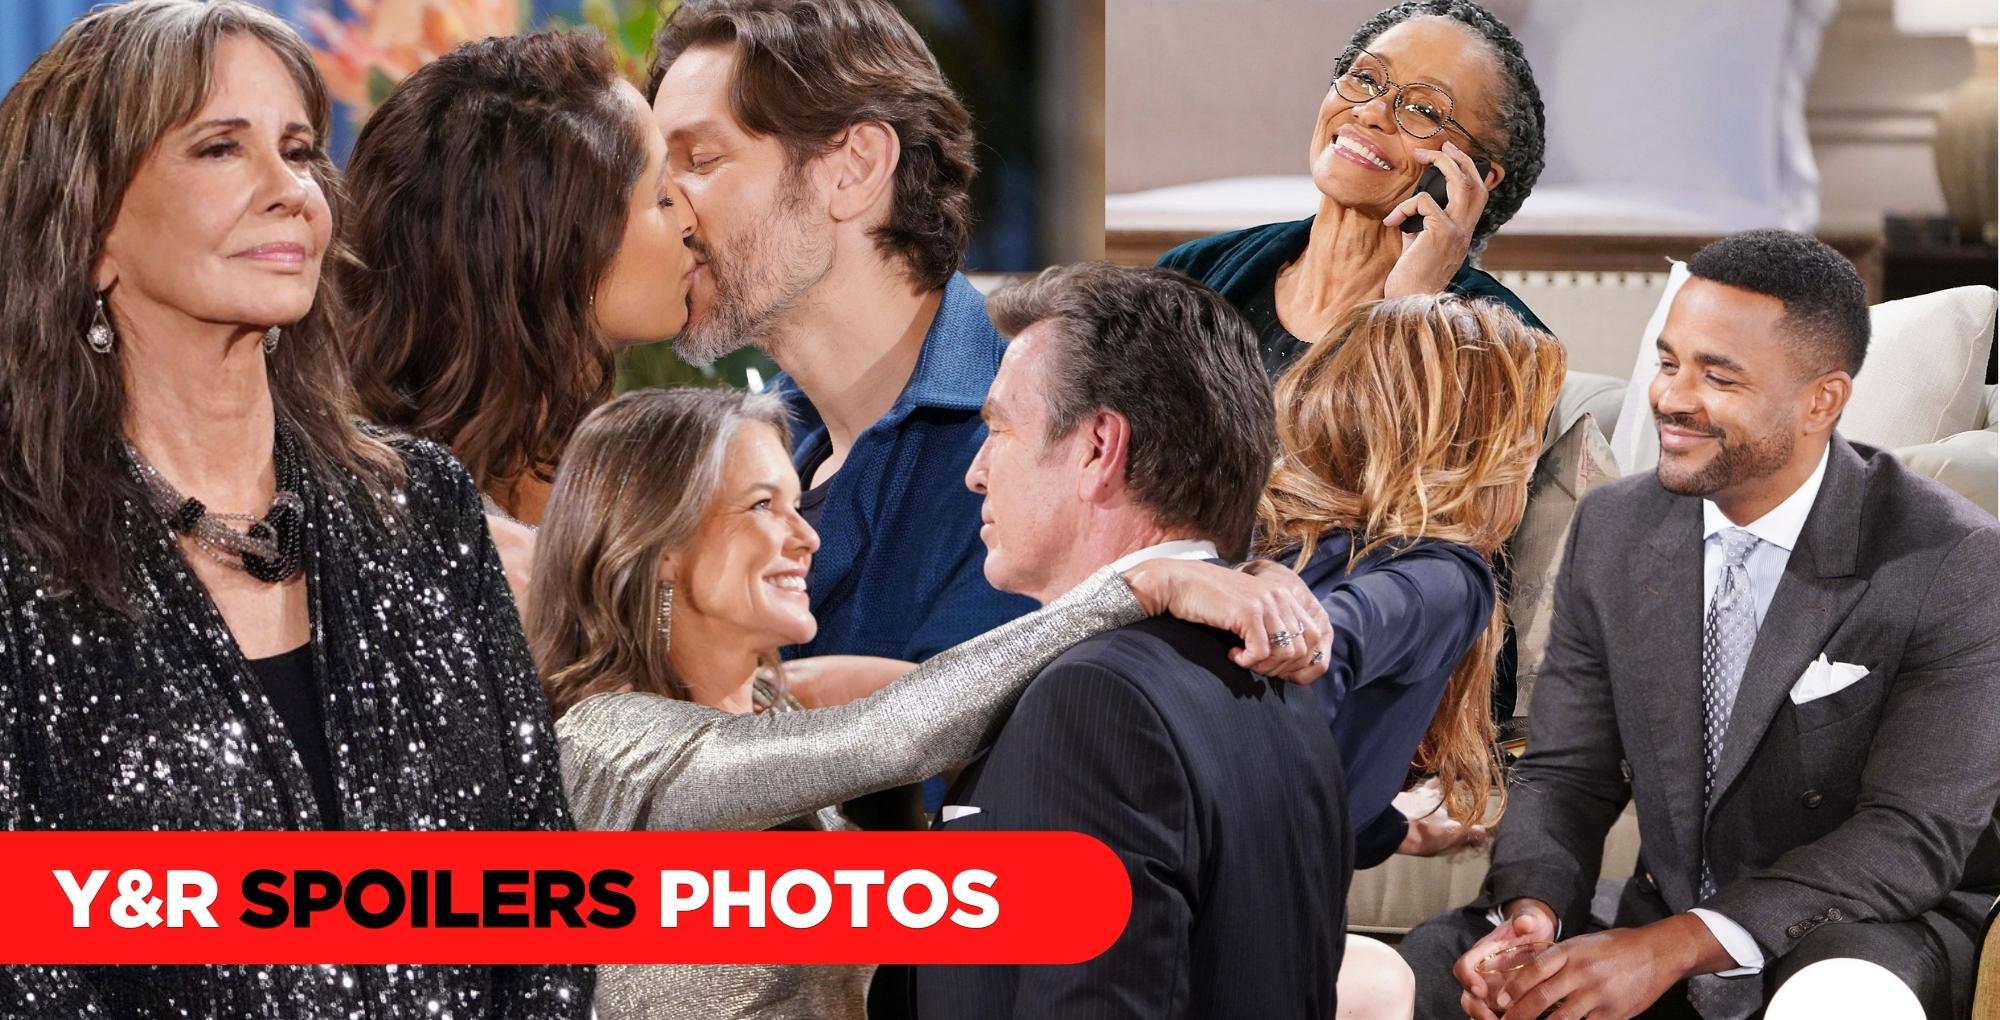 Y&R Spoilers Photos: An Old Rivalry Threatens To Heat Up 